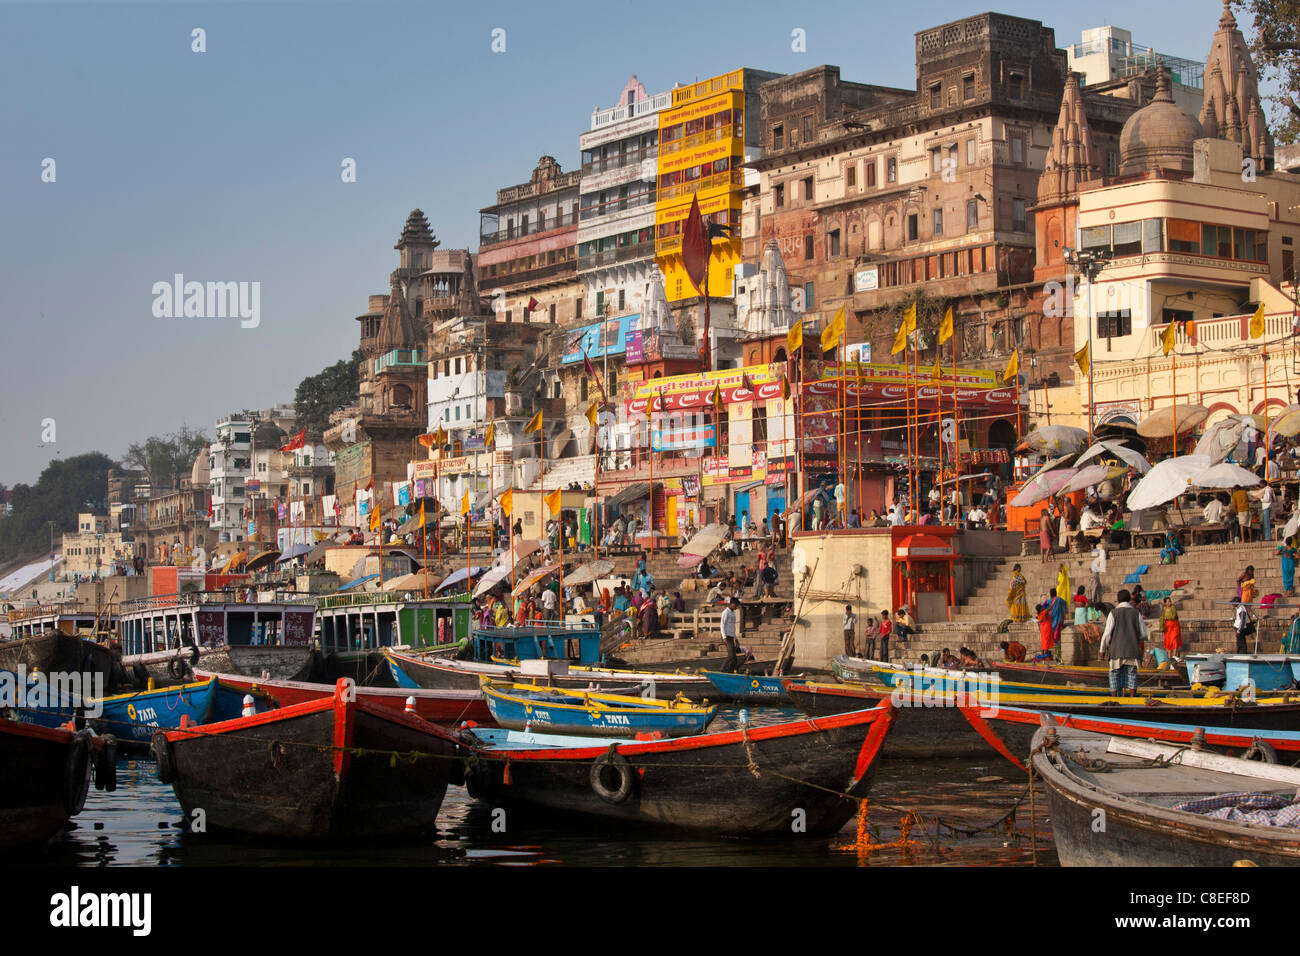 Tourist boats in The Ganges River at Dashashwamedh Ghat to watch Hindus bathing in Holy City of Varanasi, Benares, India Stock Photo